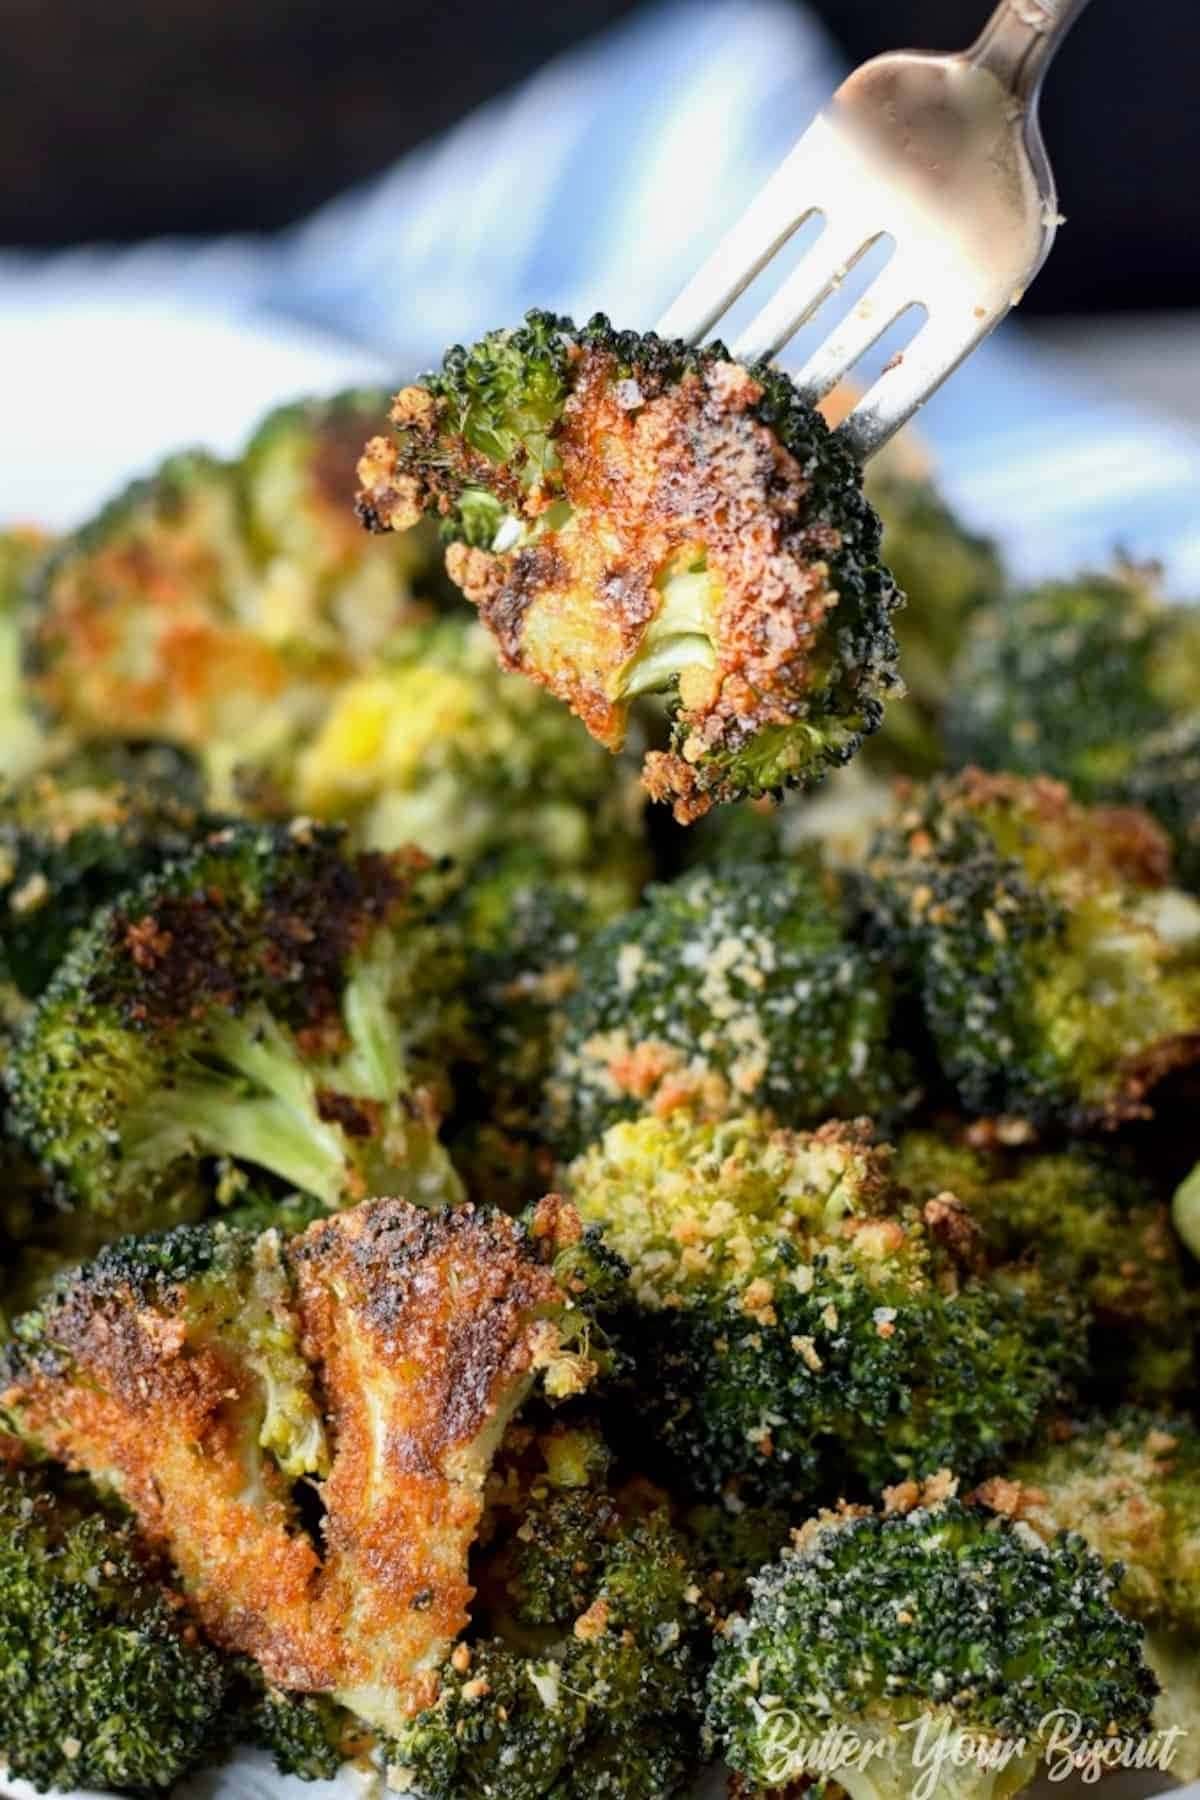 Roasted broccoli with parmesan cheese. 